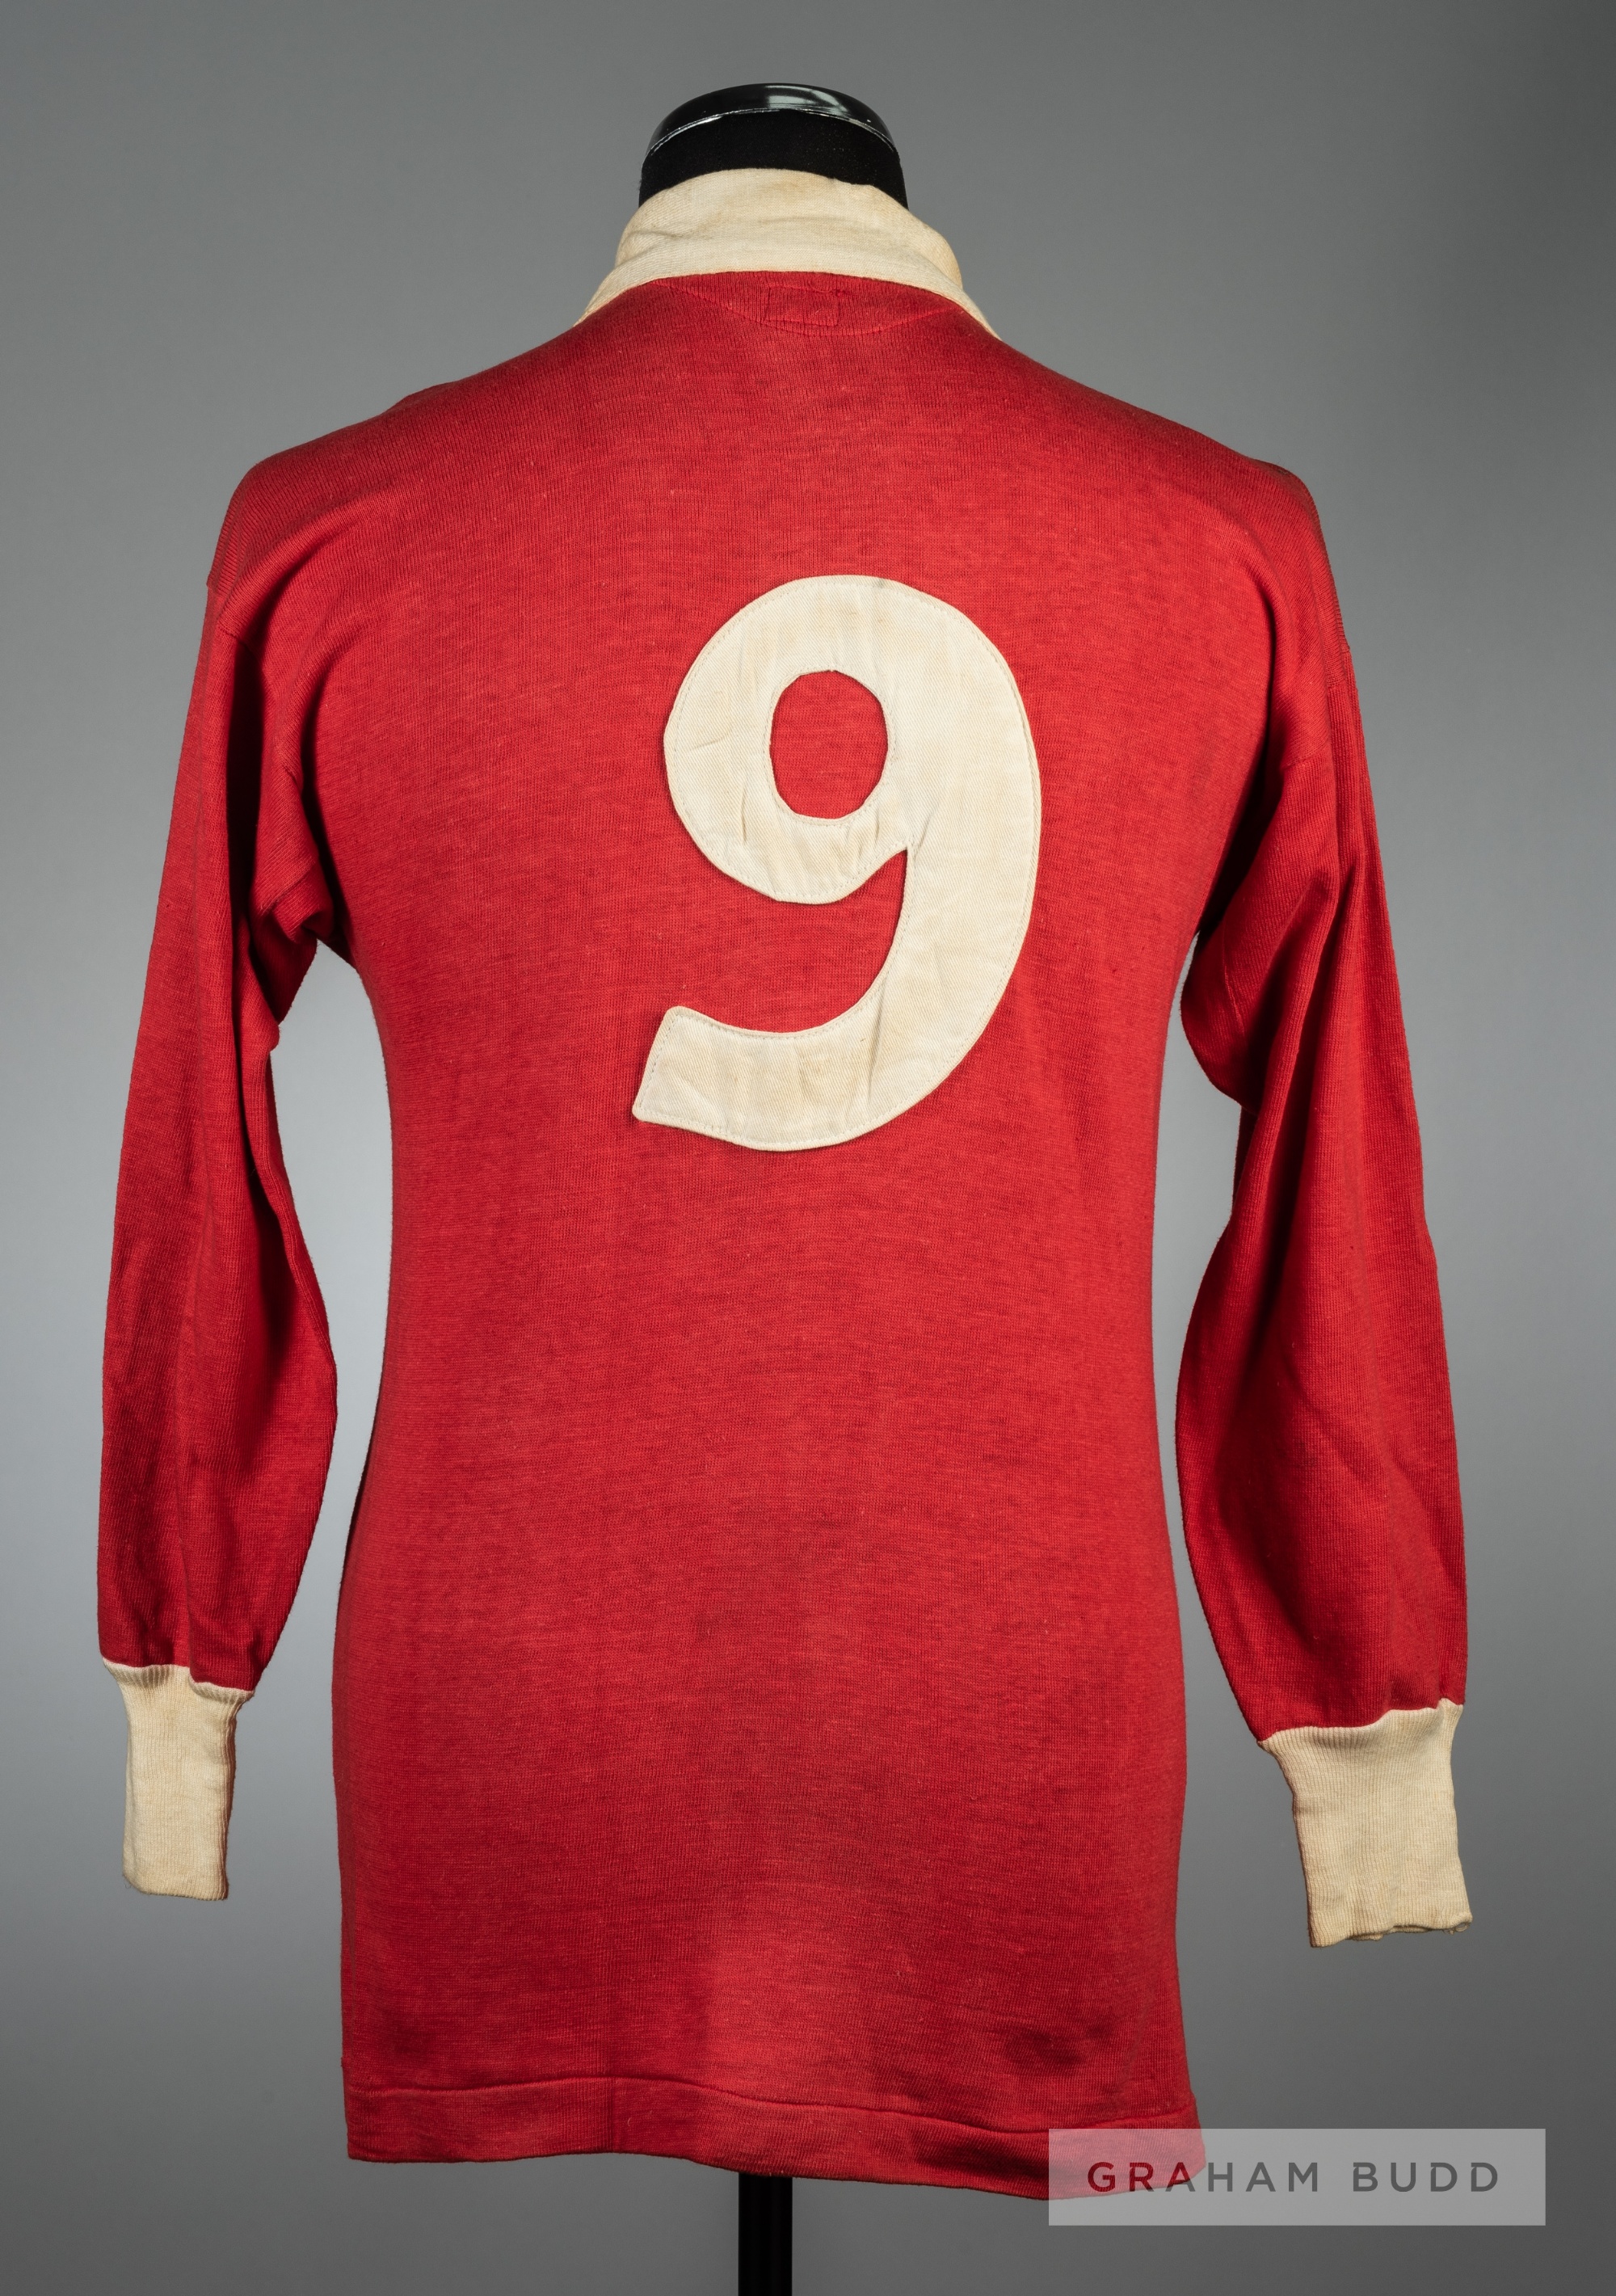 Trevor Ford red Wales No.9 jersey worn in the 1951 Festival of Britain International football - Image 2 of 2